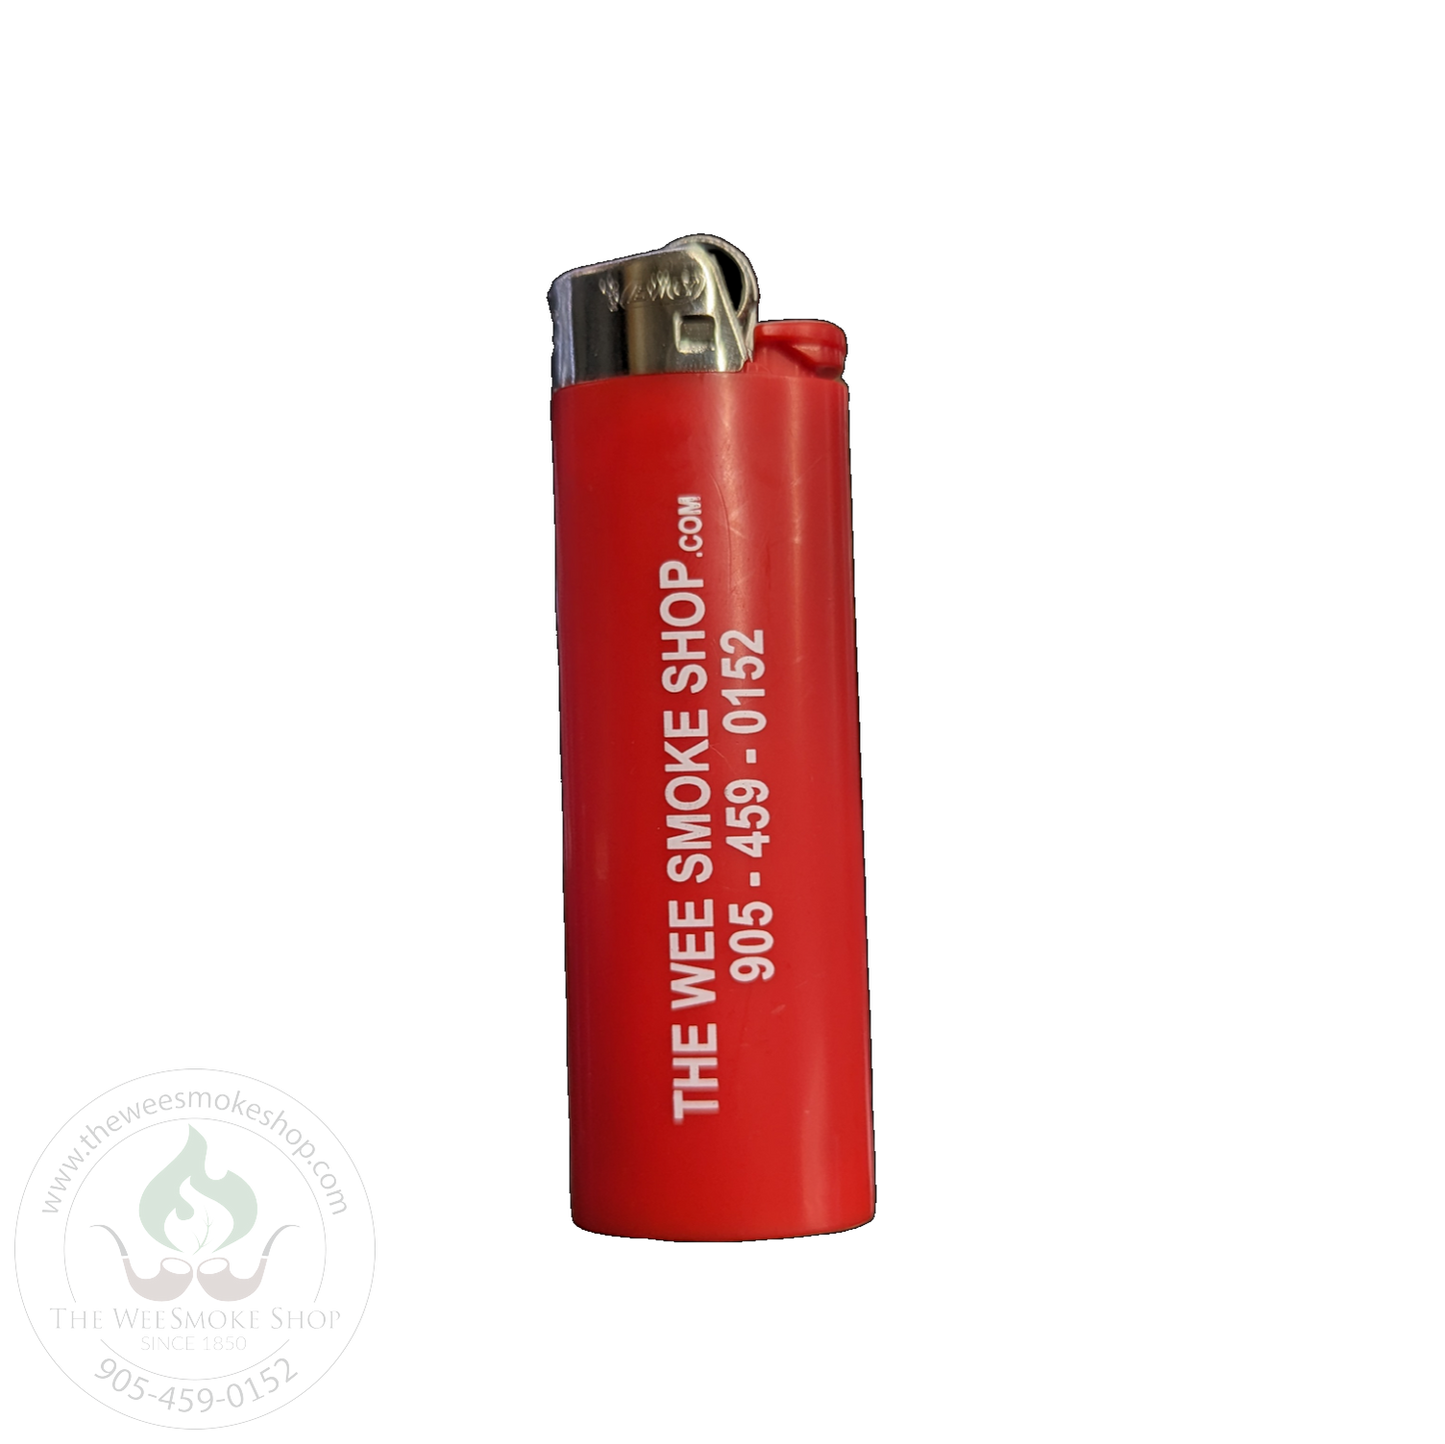 Red Bic Lighter with company name and number - Wee Smoke Shop